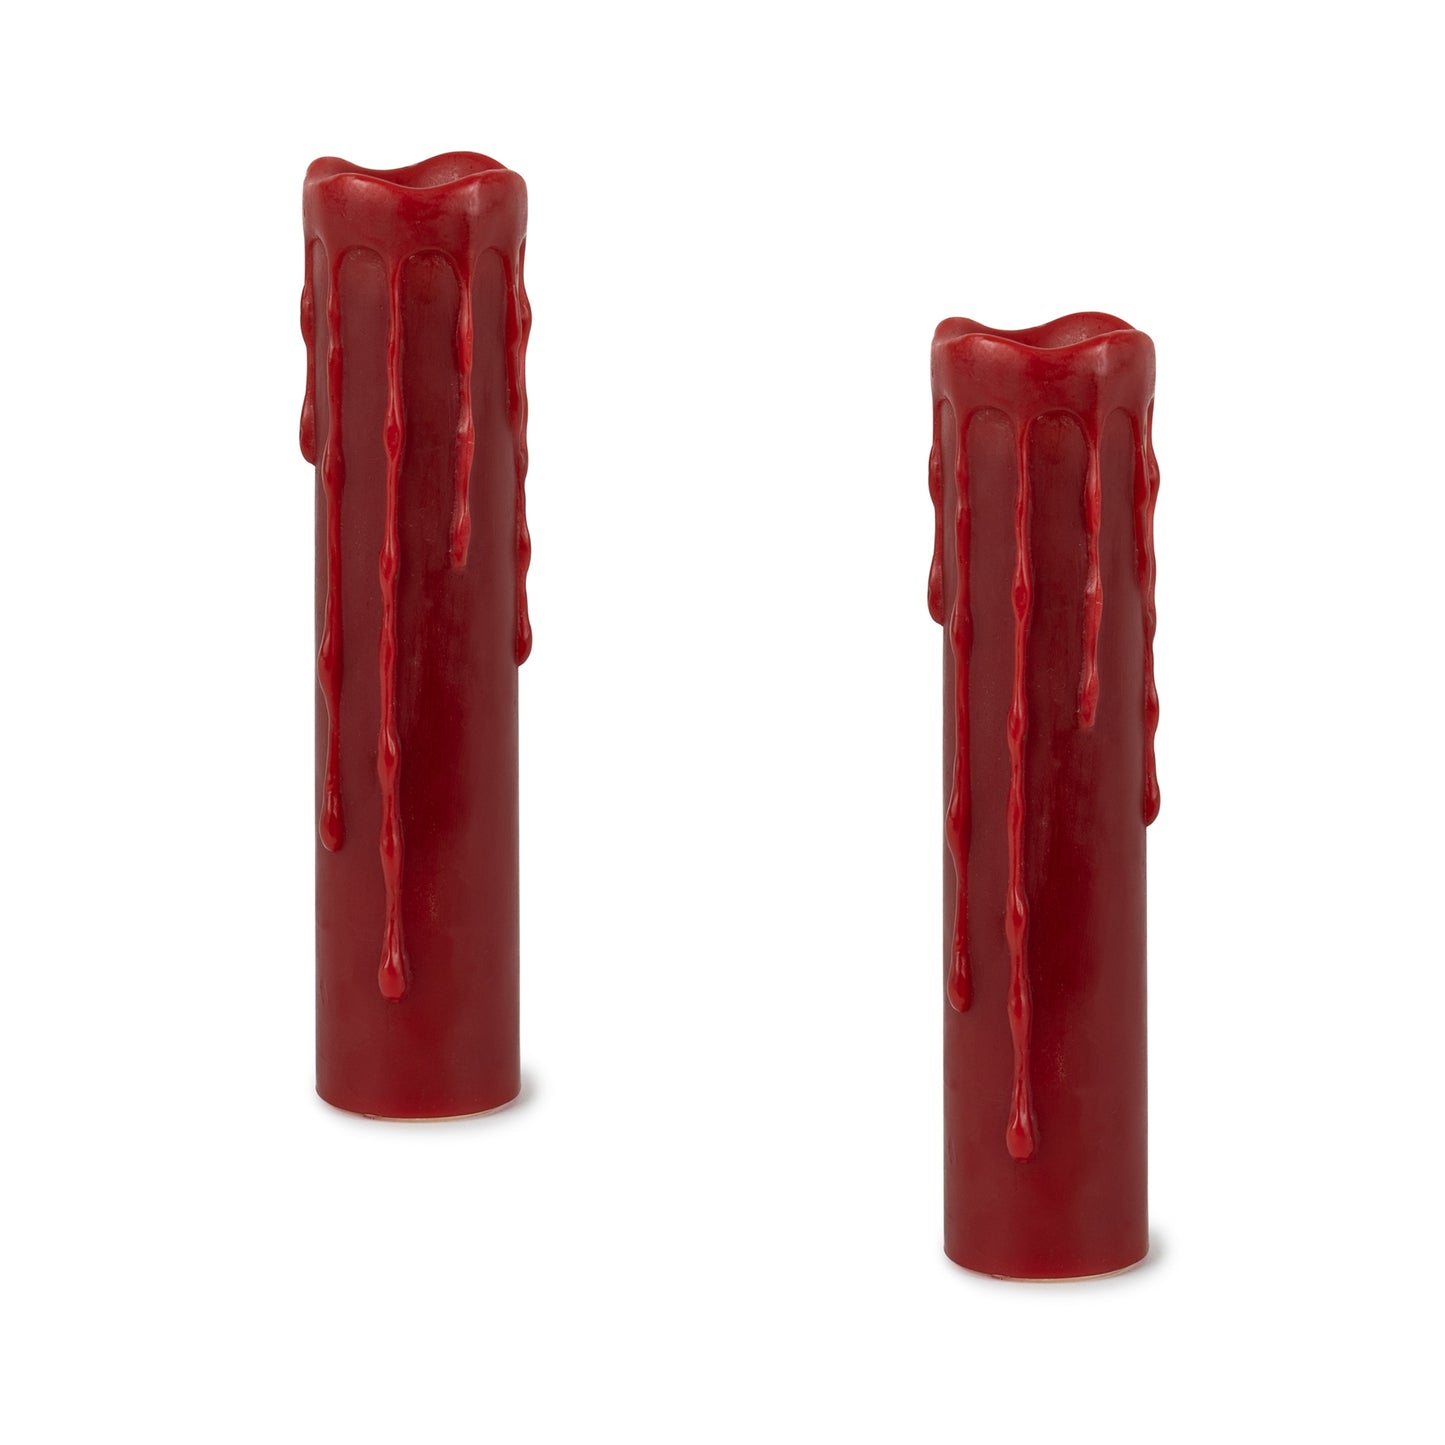 Red LED Dripping Wax Designer Candle with Remote (Set of 2)